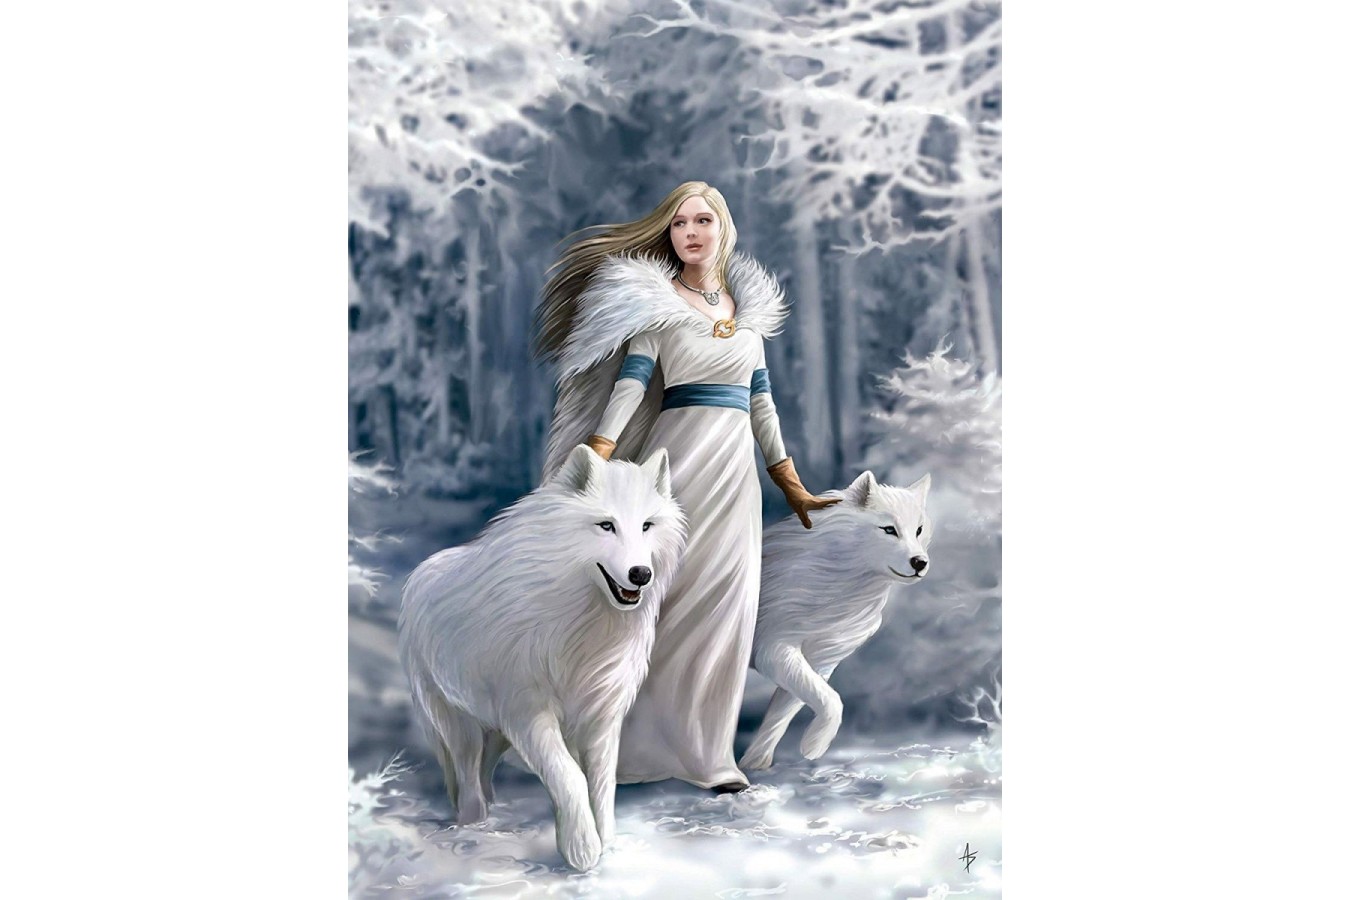 Puzzle Clementoni - Anne Stokes: Guardians of Winter, 1.000 piese (39477)